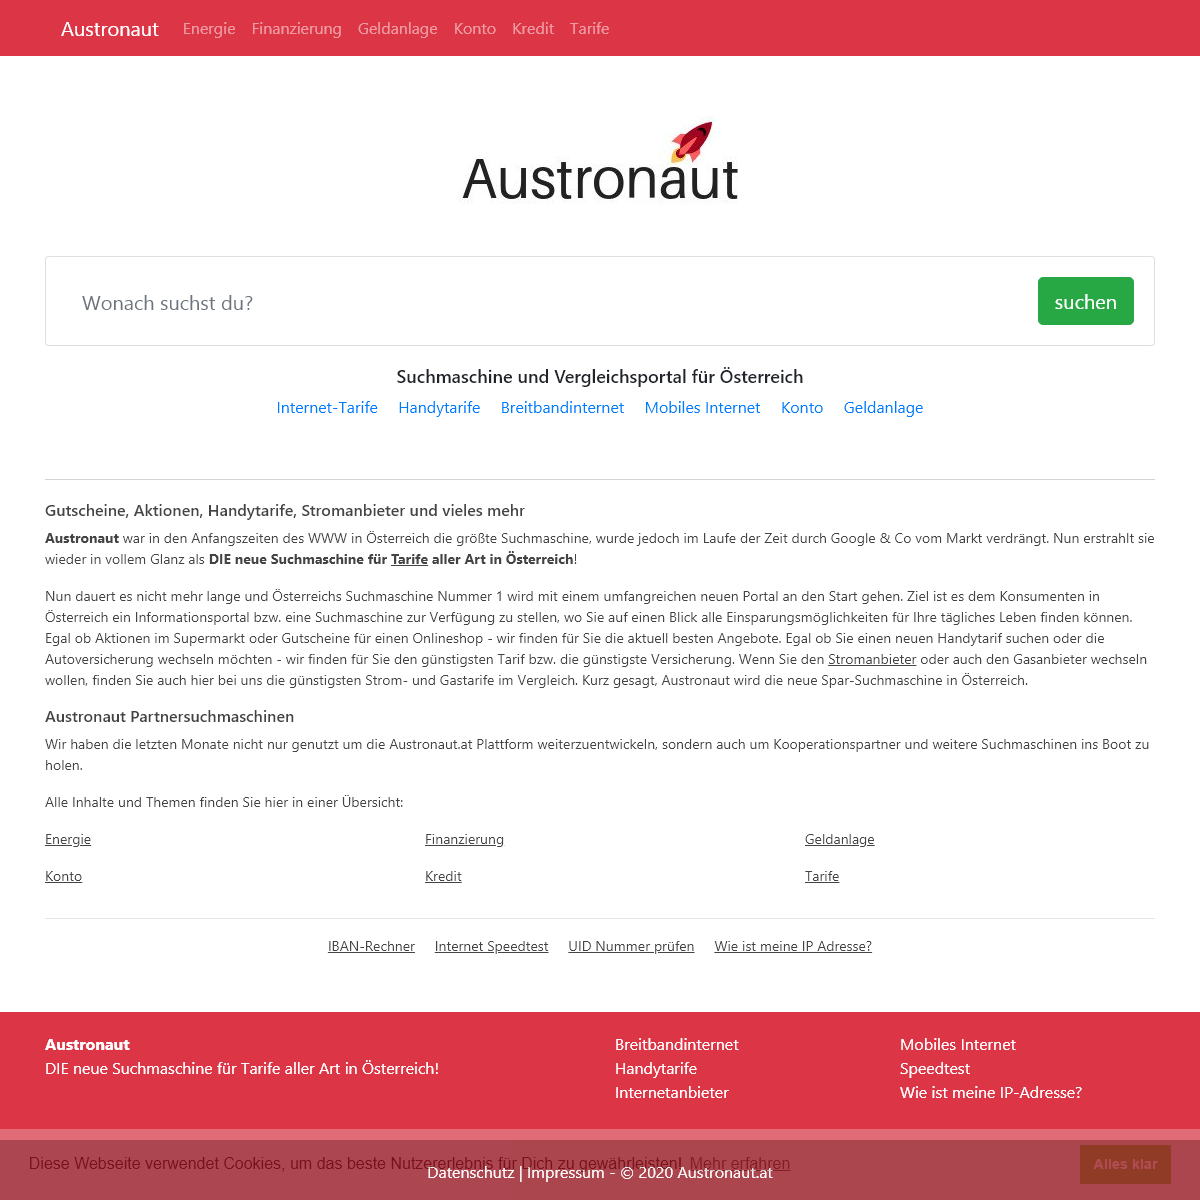 A complete backup of austronaut.at